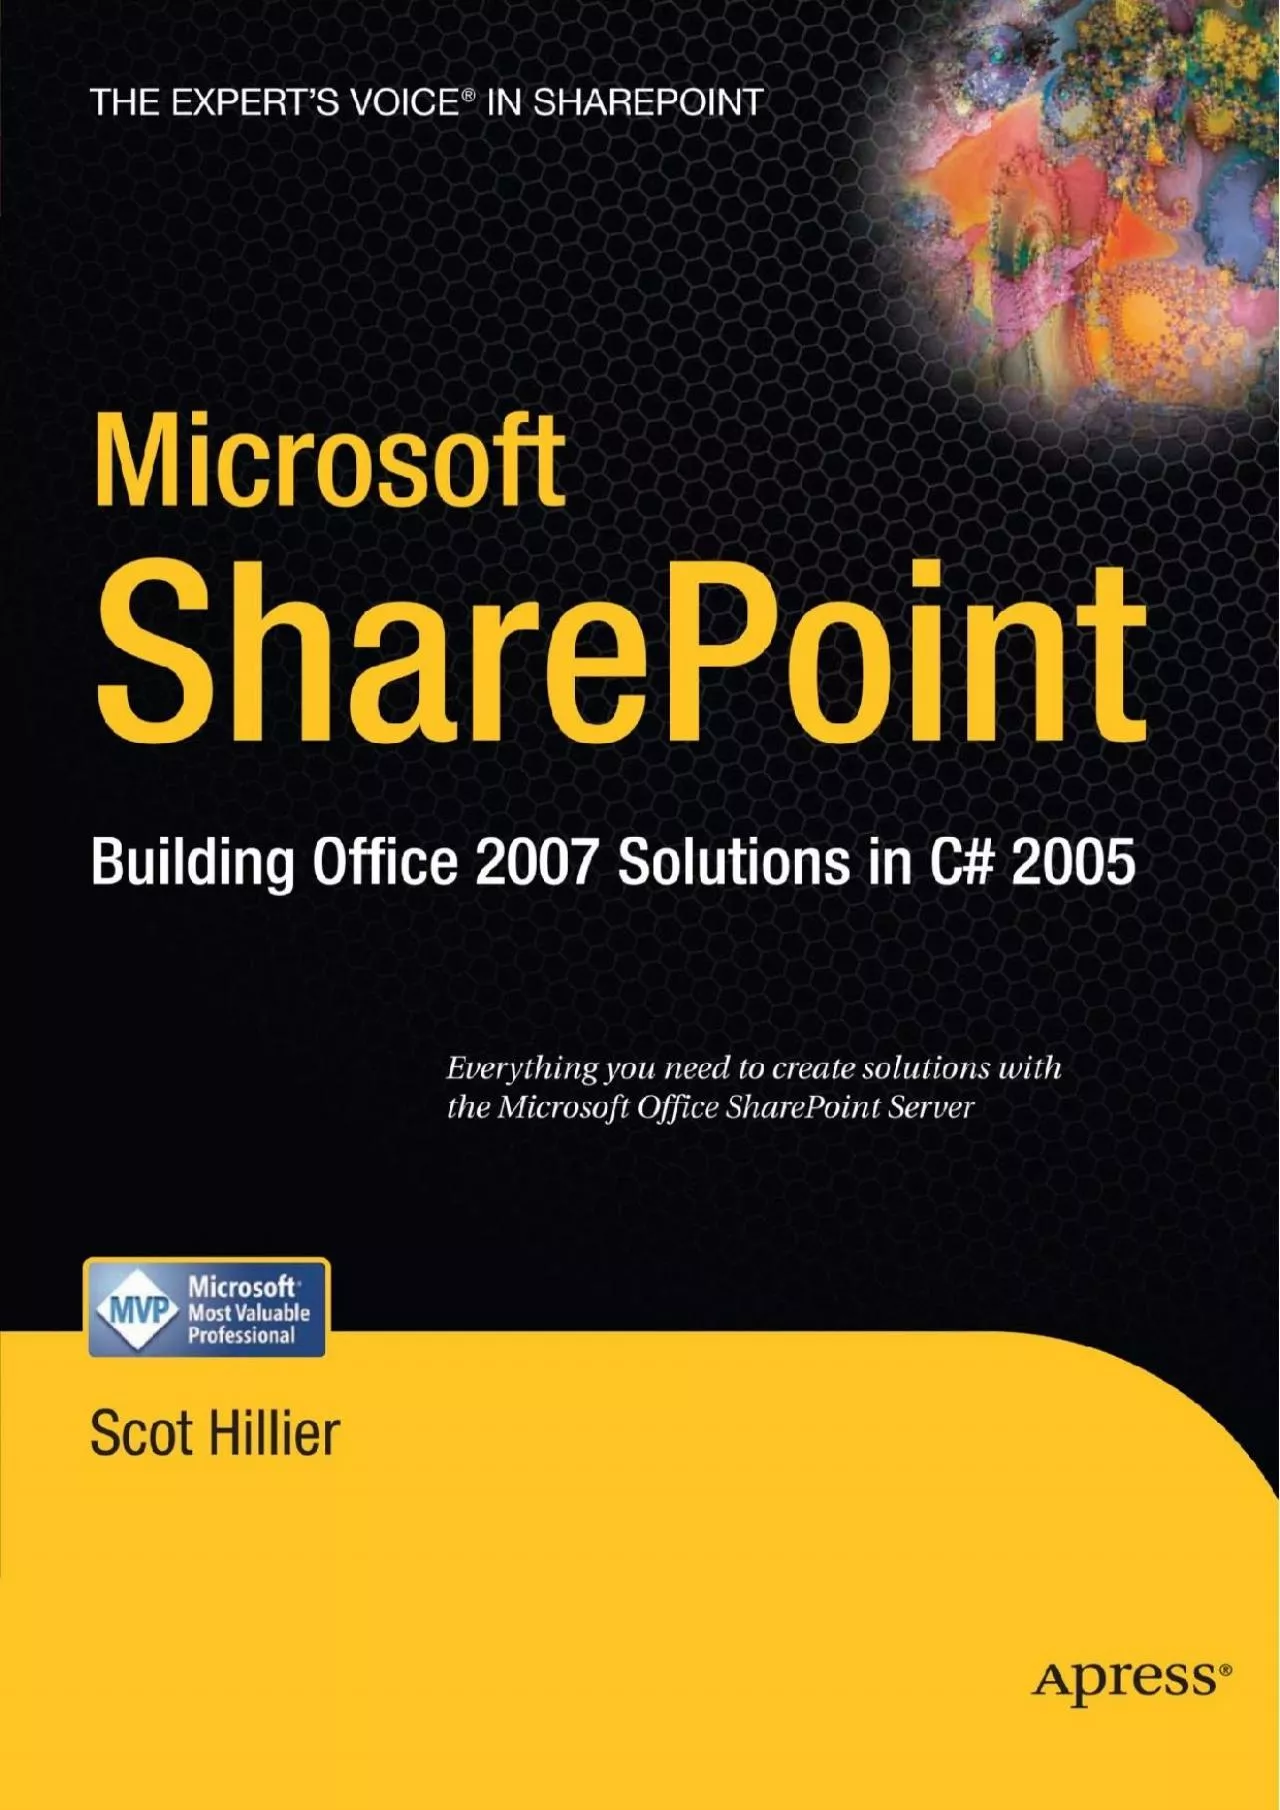 [FREE]-Microsoft SharePoint: Building Office 2007 Solutions in C 2005 (Expert\'s Voice